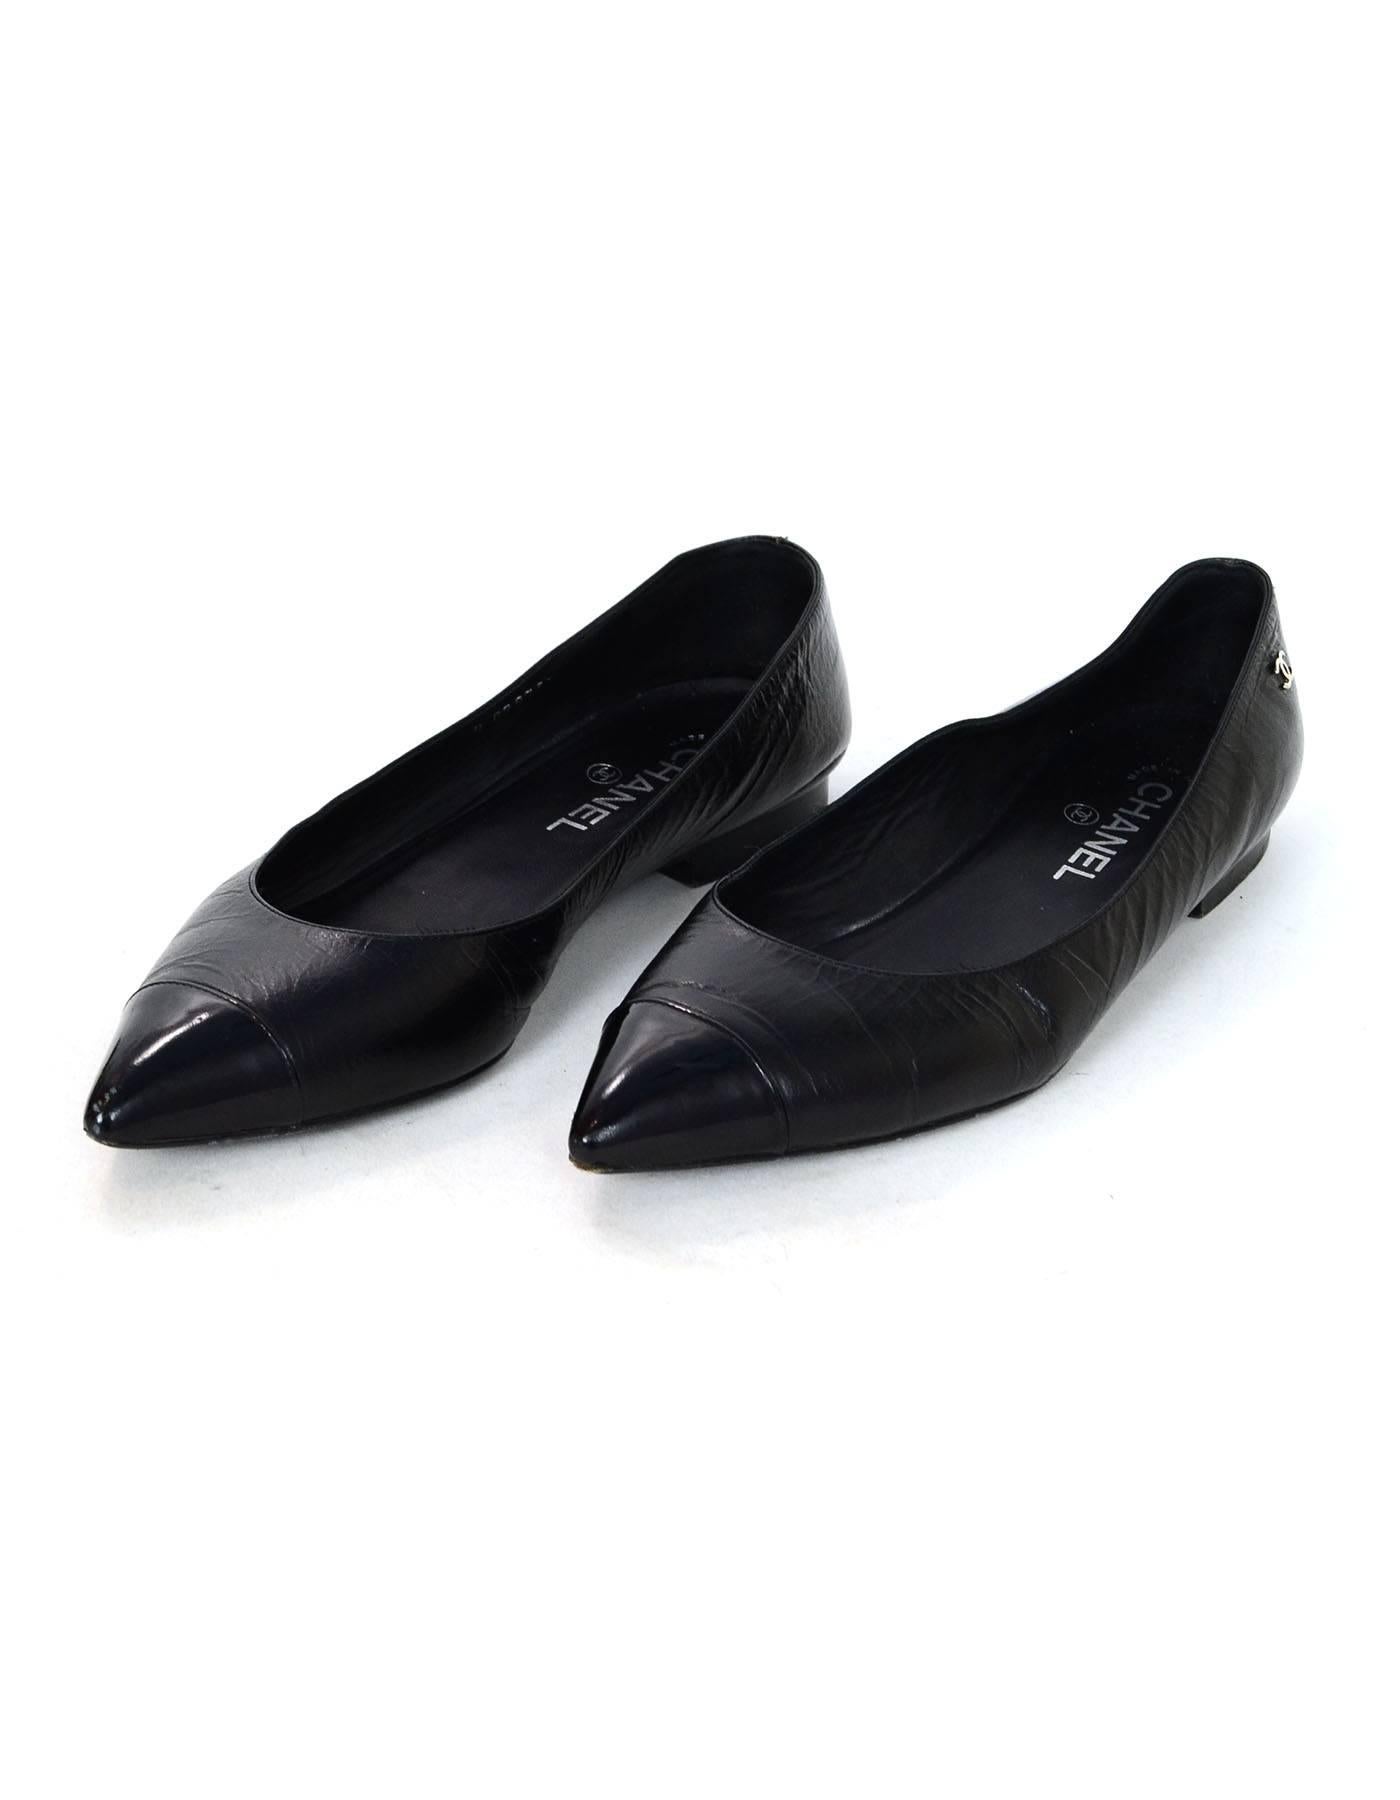 Chanel Black Leather & Patent Cap-Toe Flats Sz 40.5

Made In: Italy
Color: Black
Materials: Leather, patent leather
Closure/Opening: Slide on
Sole Stamp: CC Made in Italy 40.5
Overall Condition: Very good pre-owned condition with the exception of